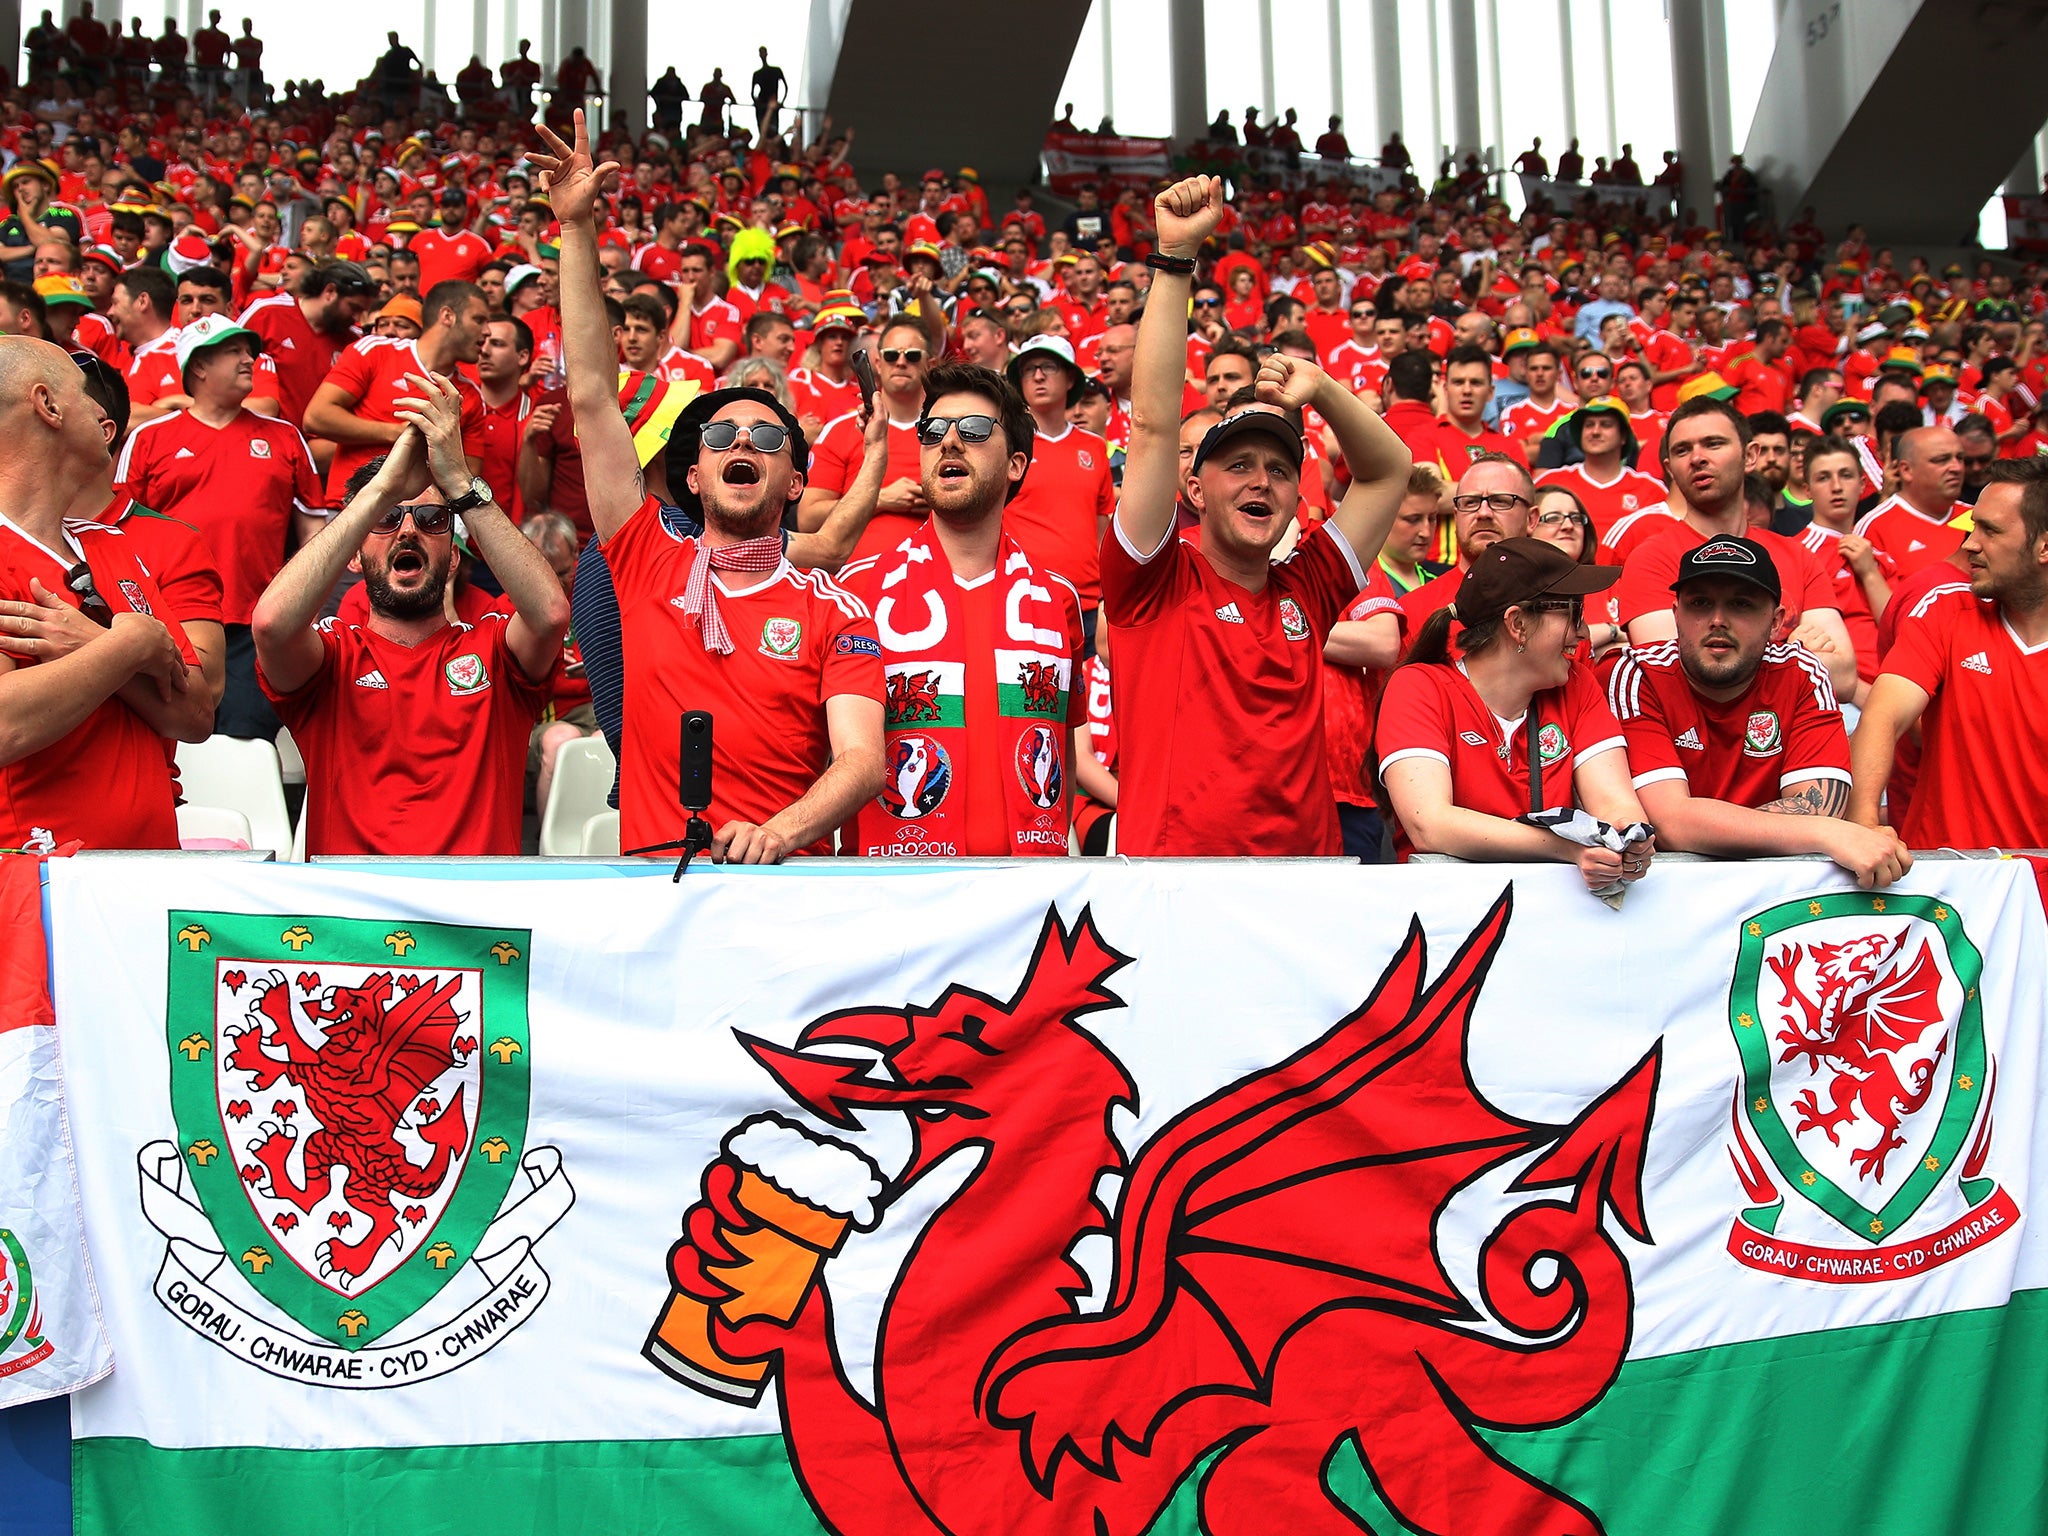 Wales fans in full voice against Slovakia earlier in the tournament